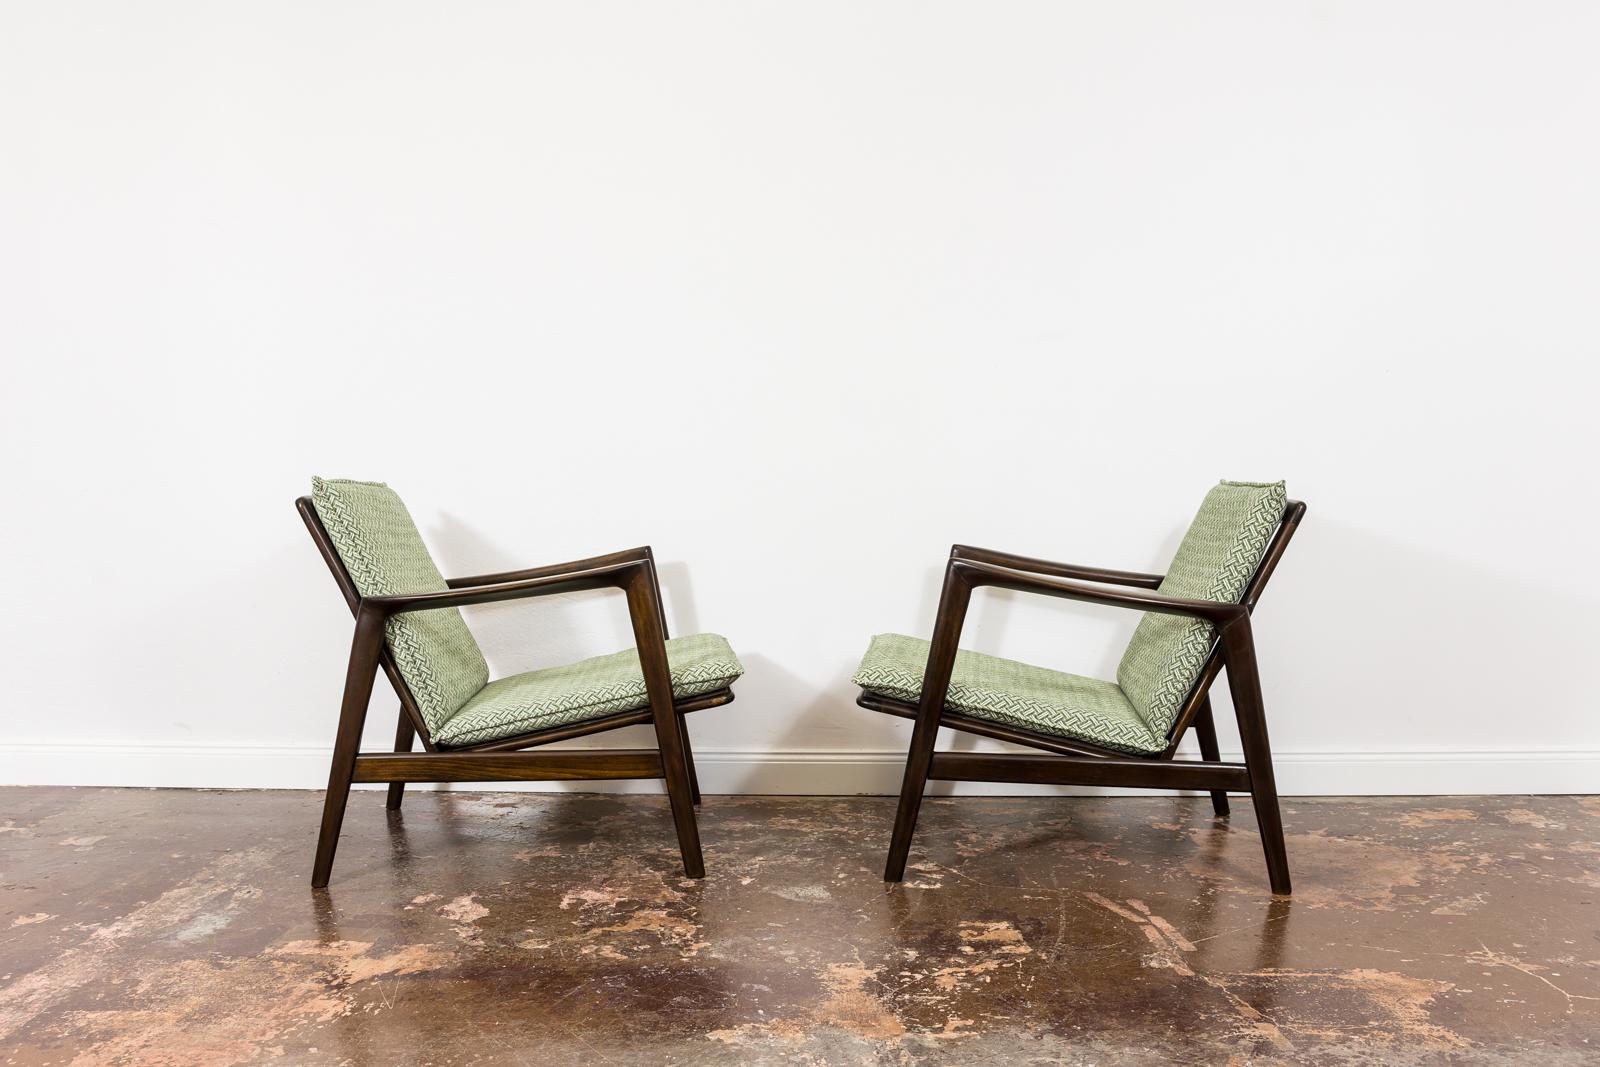 Polish Pair of Mid Century Modern Armchairs Type 300-130, 1960s, Poland For Sale